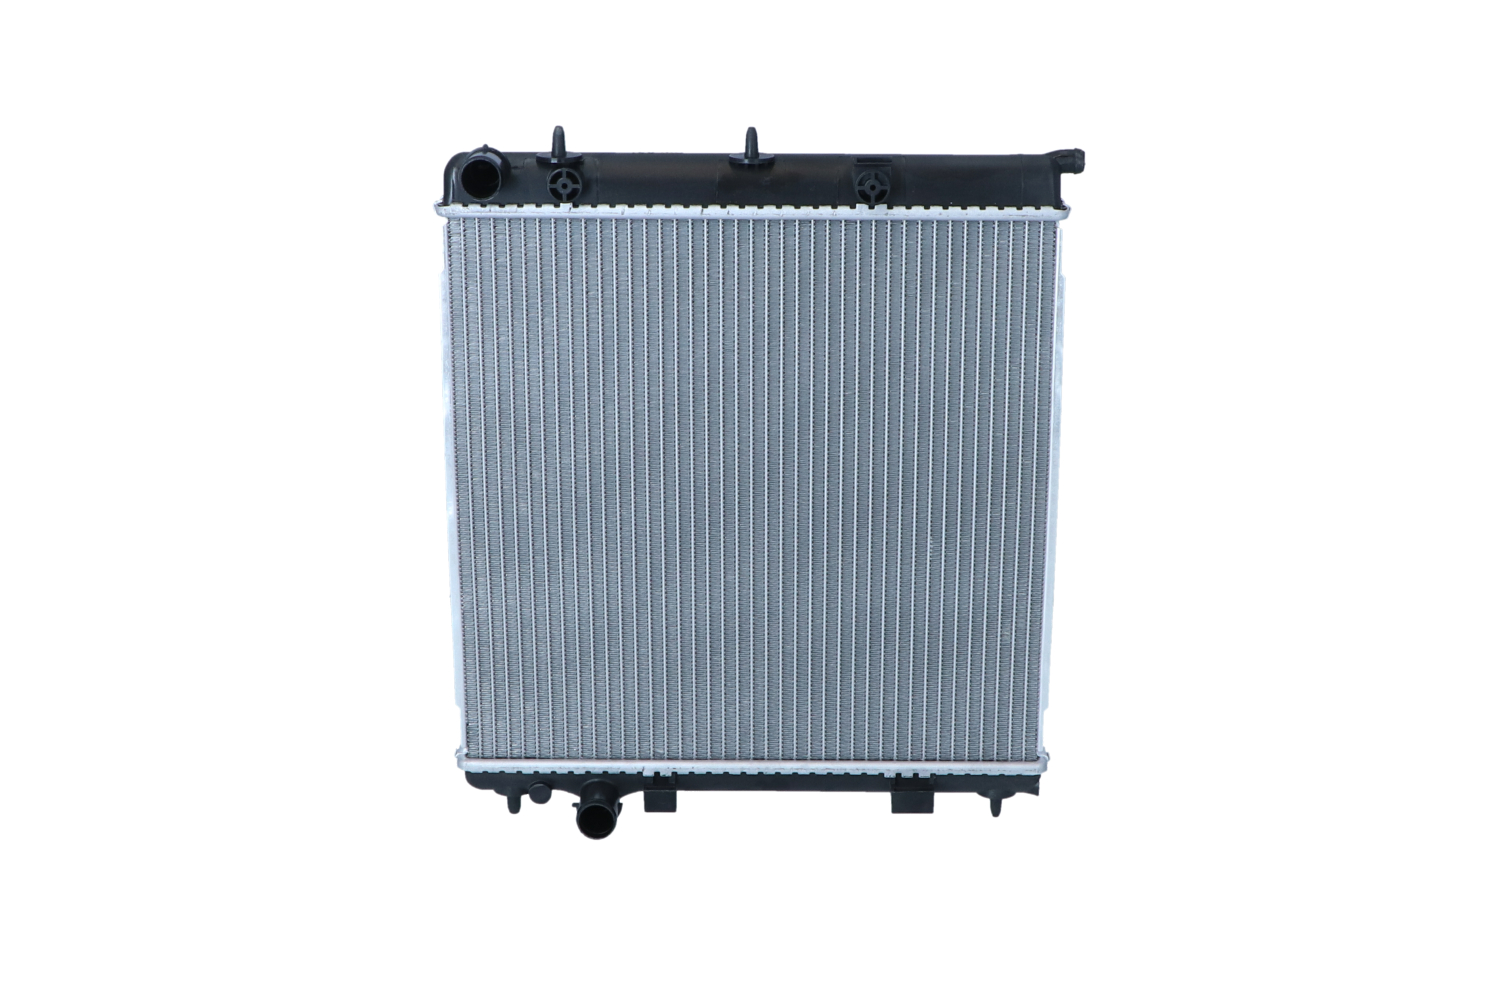 NRF 50429 Engine radiator Aluminium, 398 x 380 x 26 mm, with seal ring, Brazed cooling fins